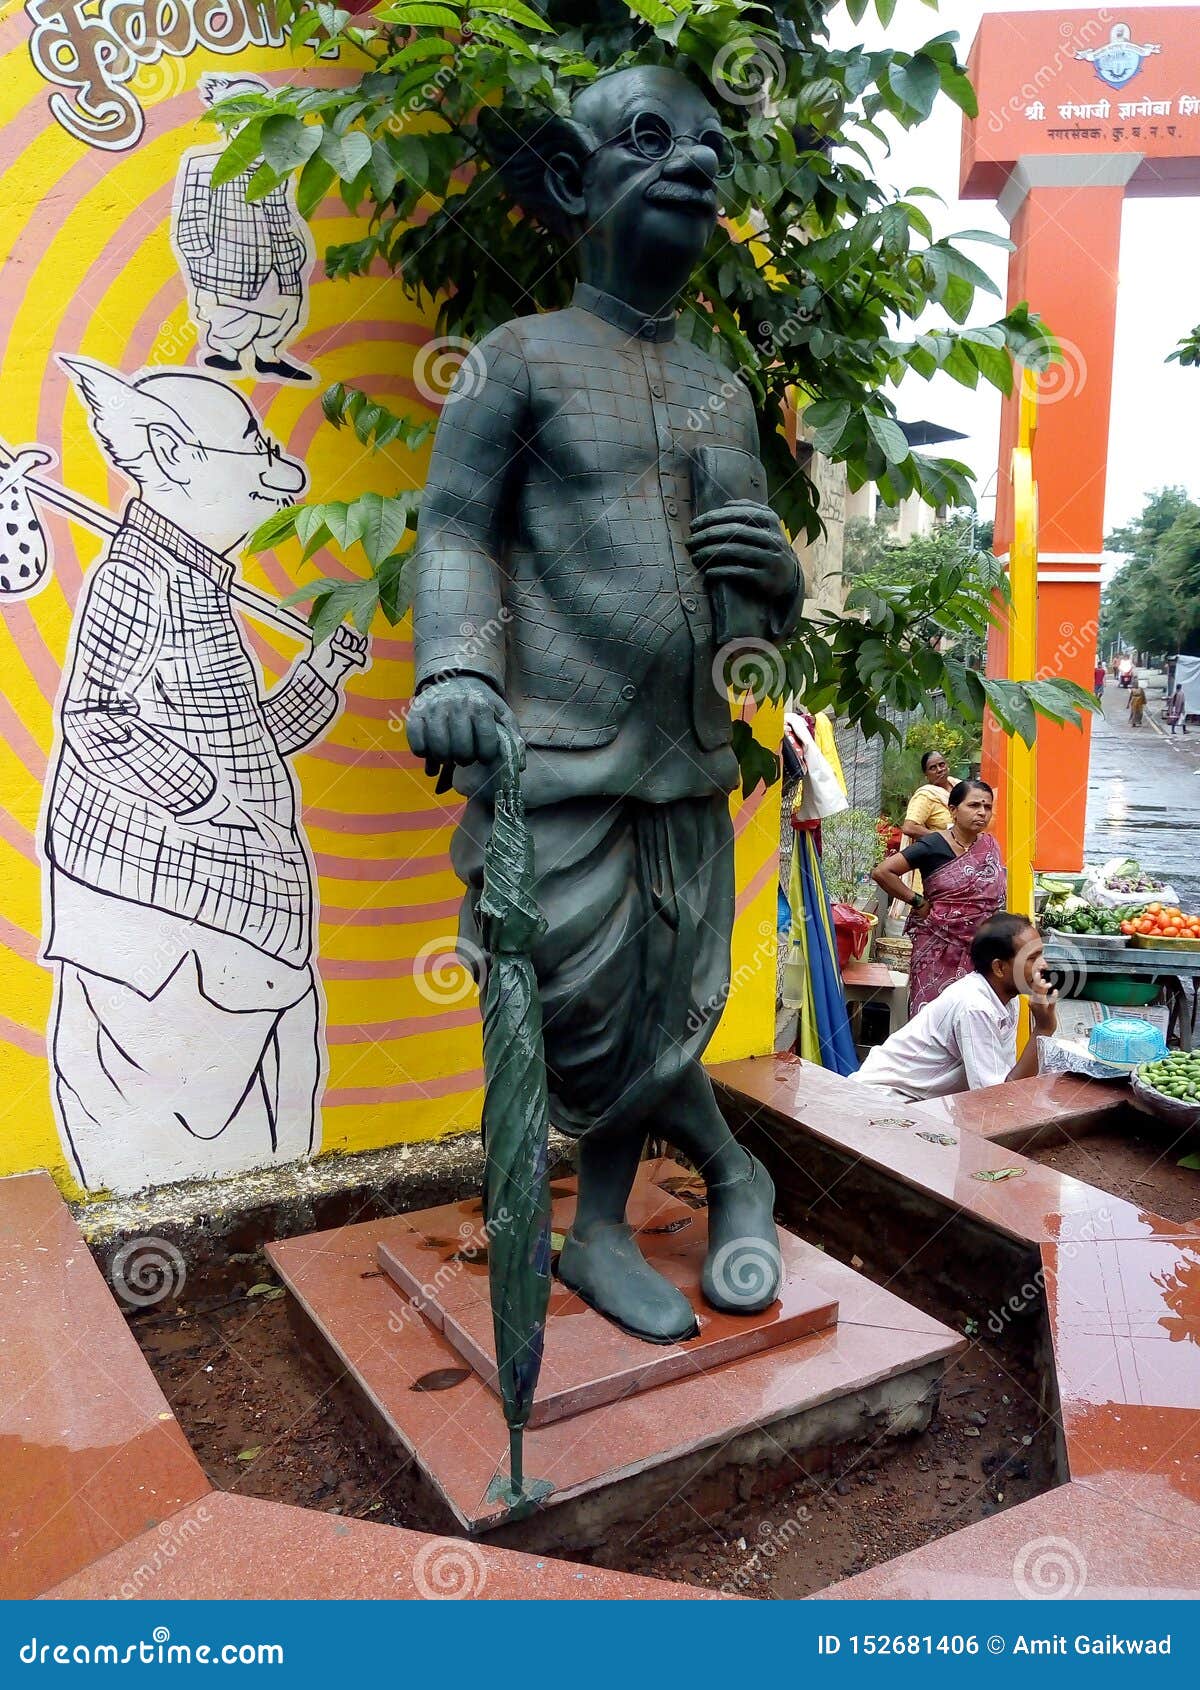 Common Man Statue Inspired by the Cartoon of Veteran Cartoonist   Editorial Photo - Image of india, common: 152681406